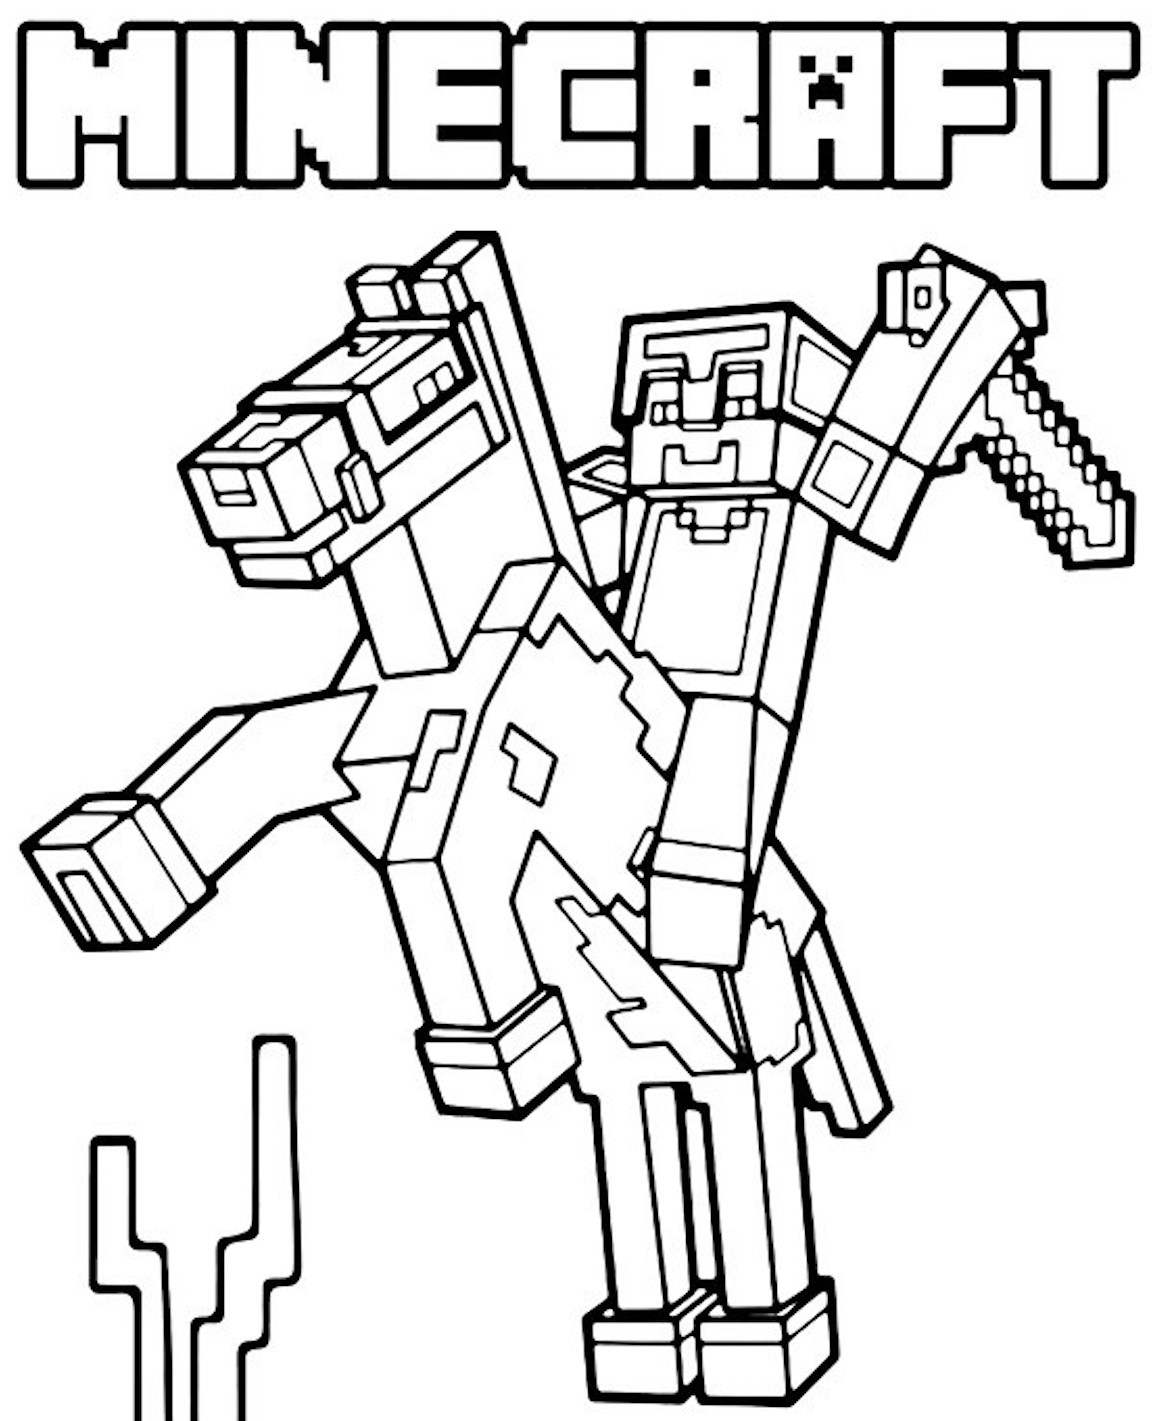 Minecraft Coloring Pages And Dozens More Top 20 Coloring Page ...